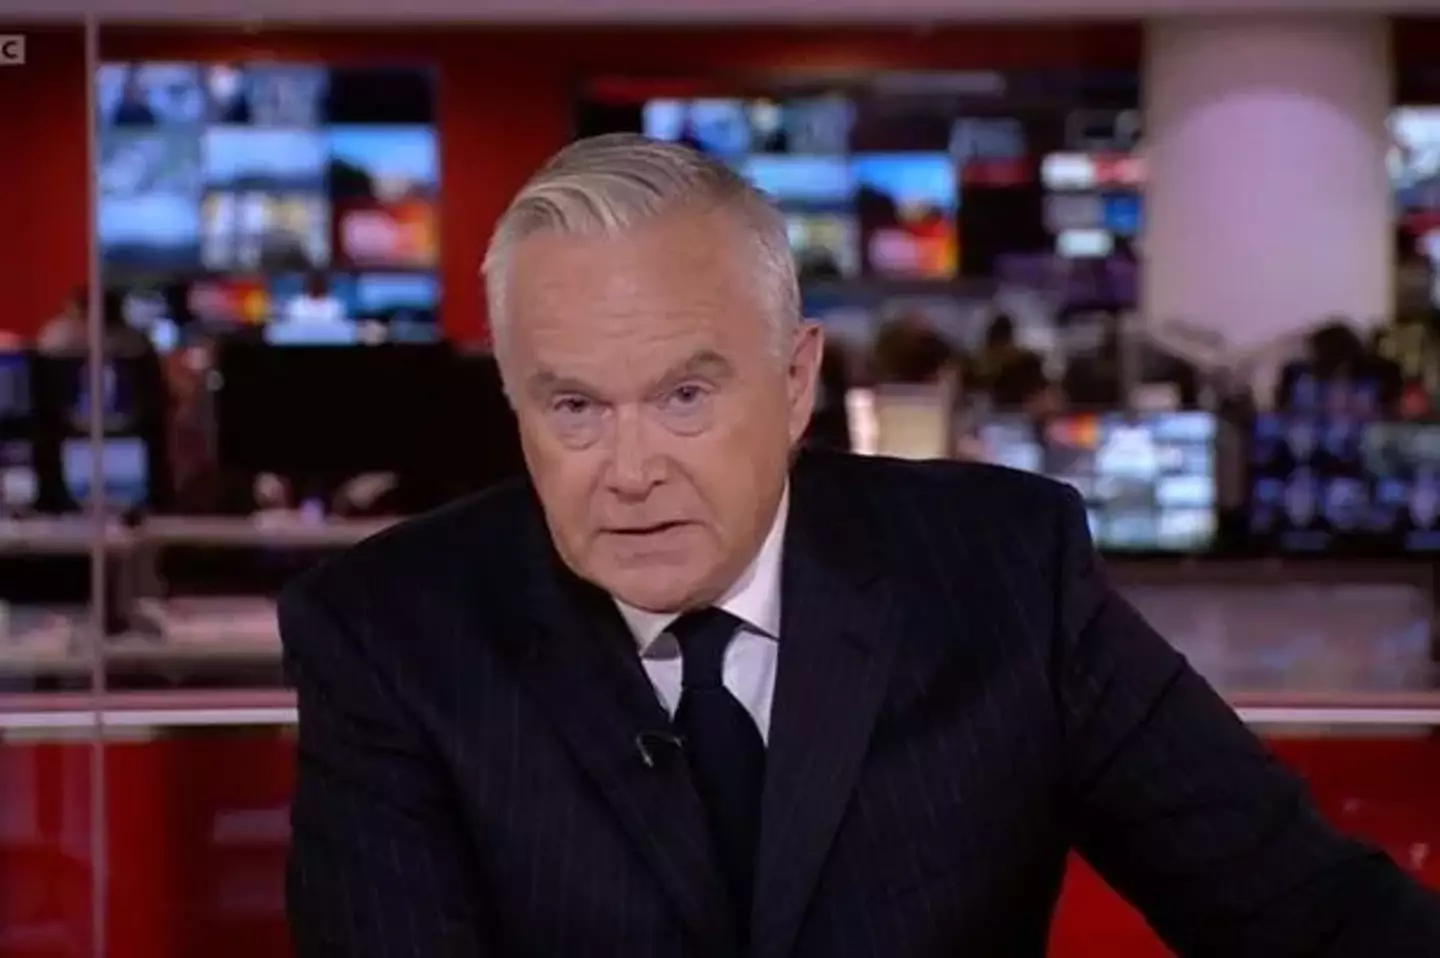 Huw Edwards resigned from the BBC. (BBC)